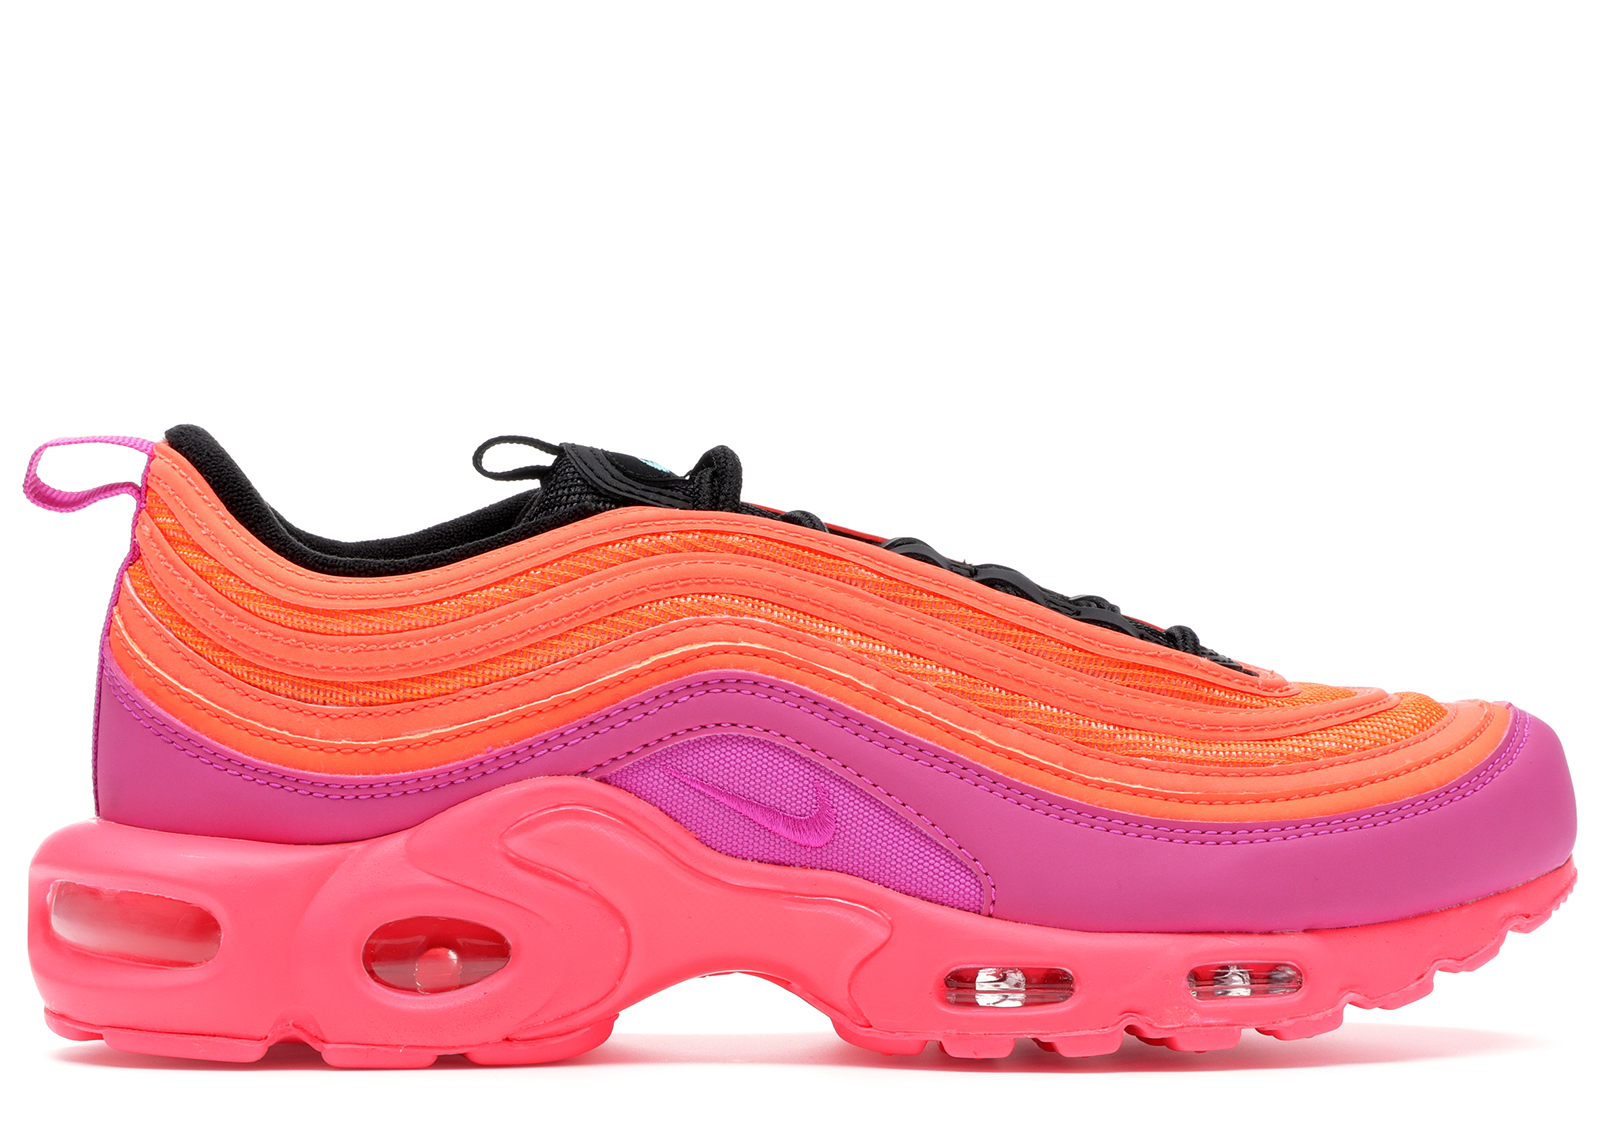 pink and blue air max plus